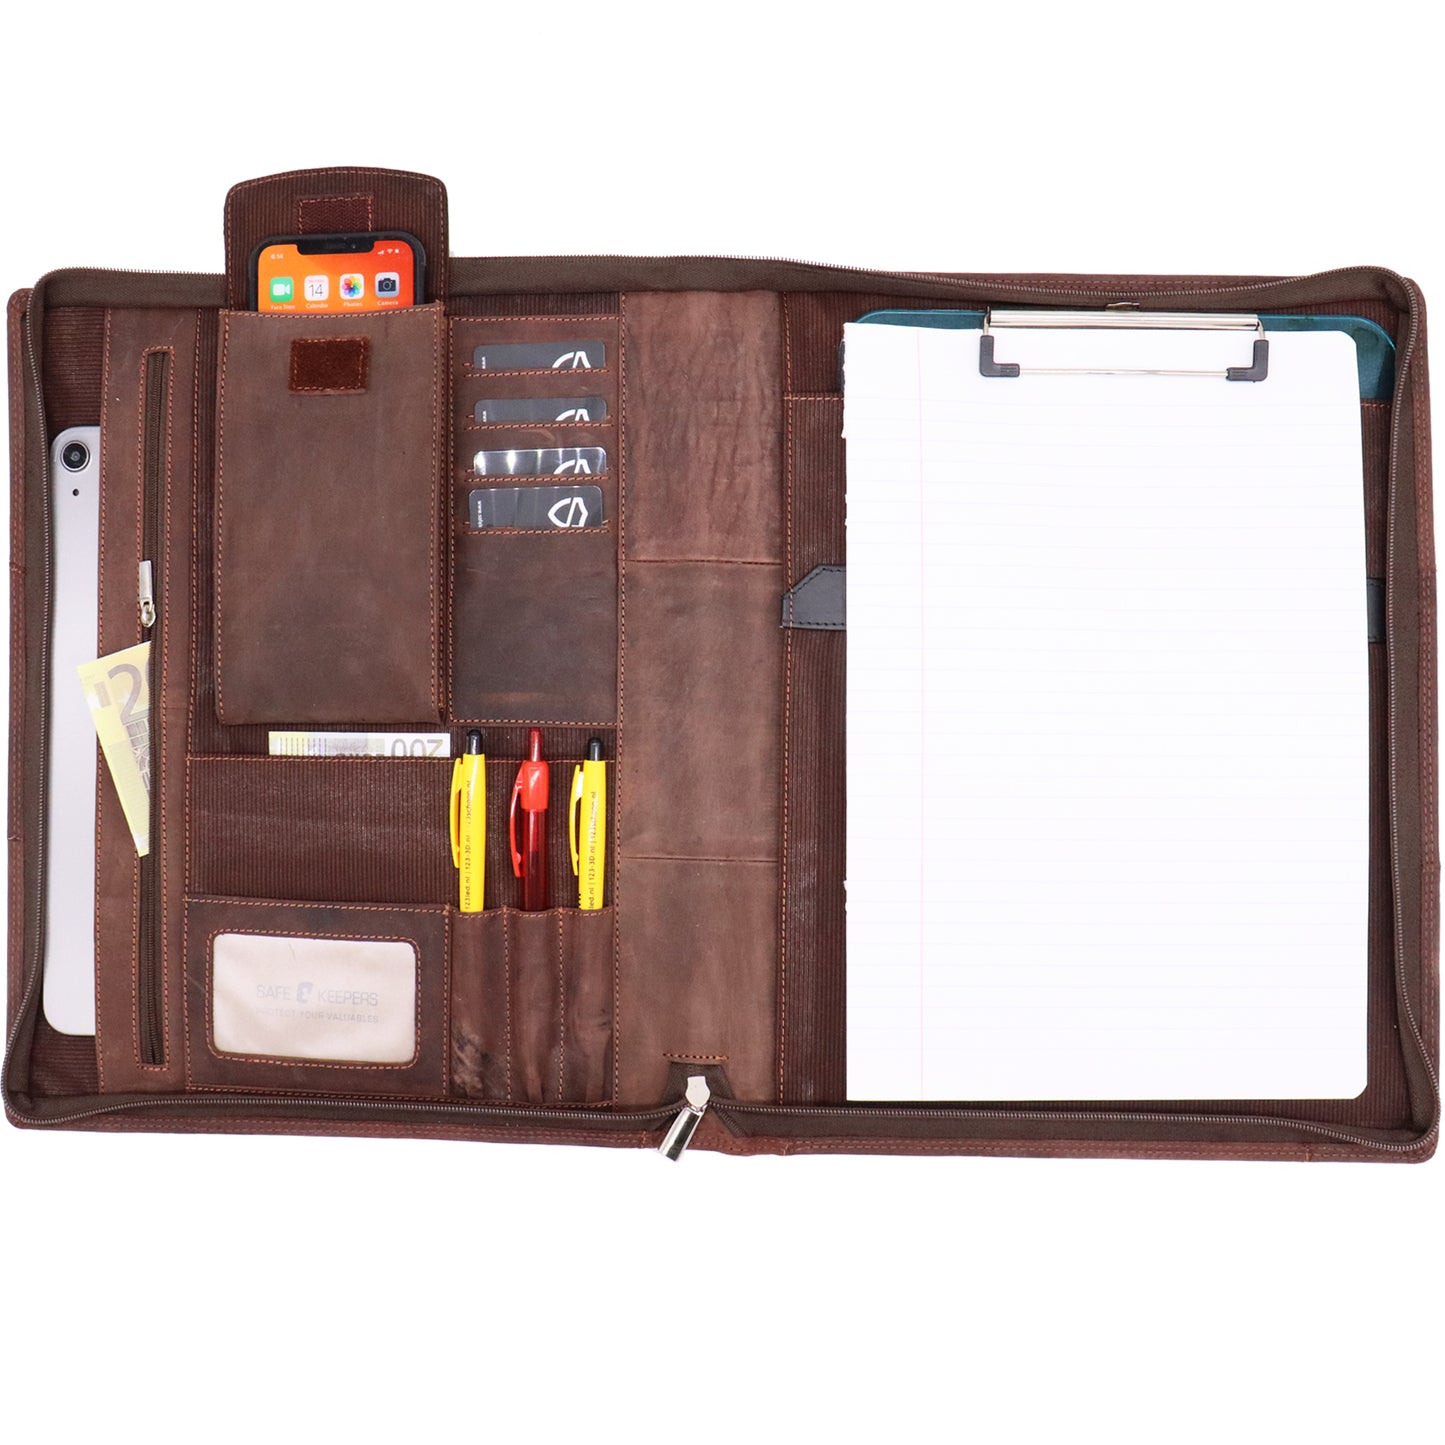 Writing cases A4 Ring binder - Document folder - Mobile bluetooth tracker finder Brown